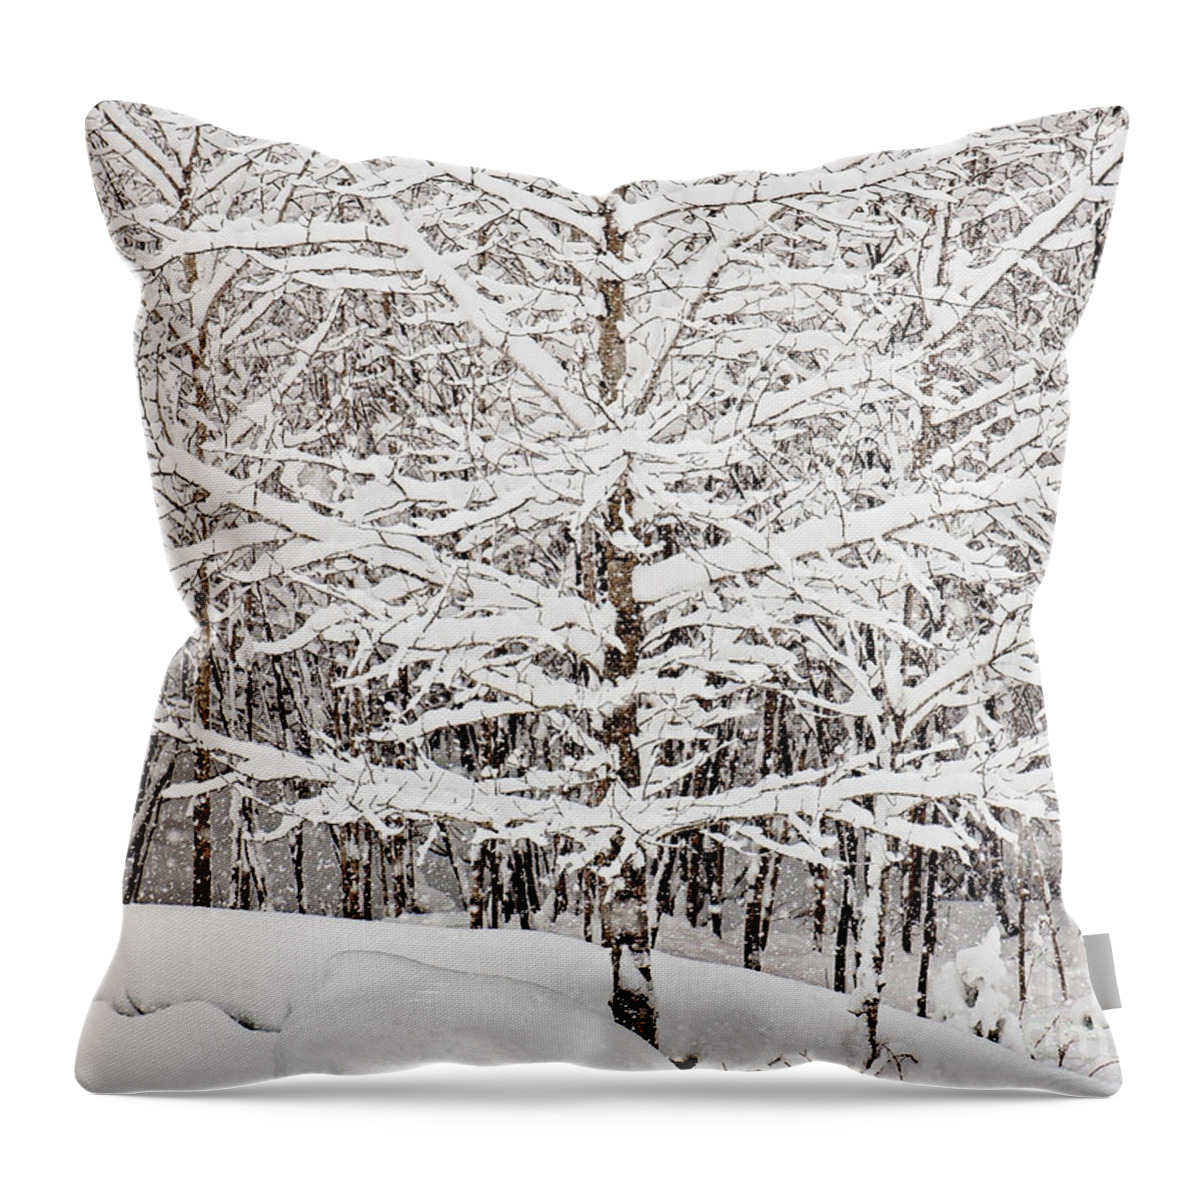 Winter Store Print Throw Pillow featuring the photograph Winter Storm Print #1 by Gwen Gibson